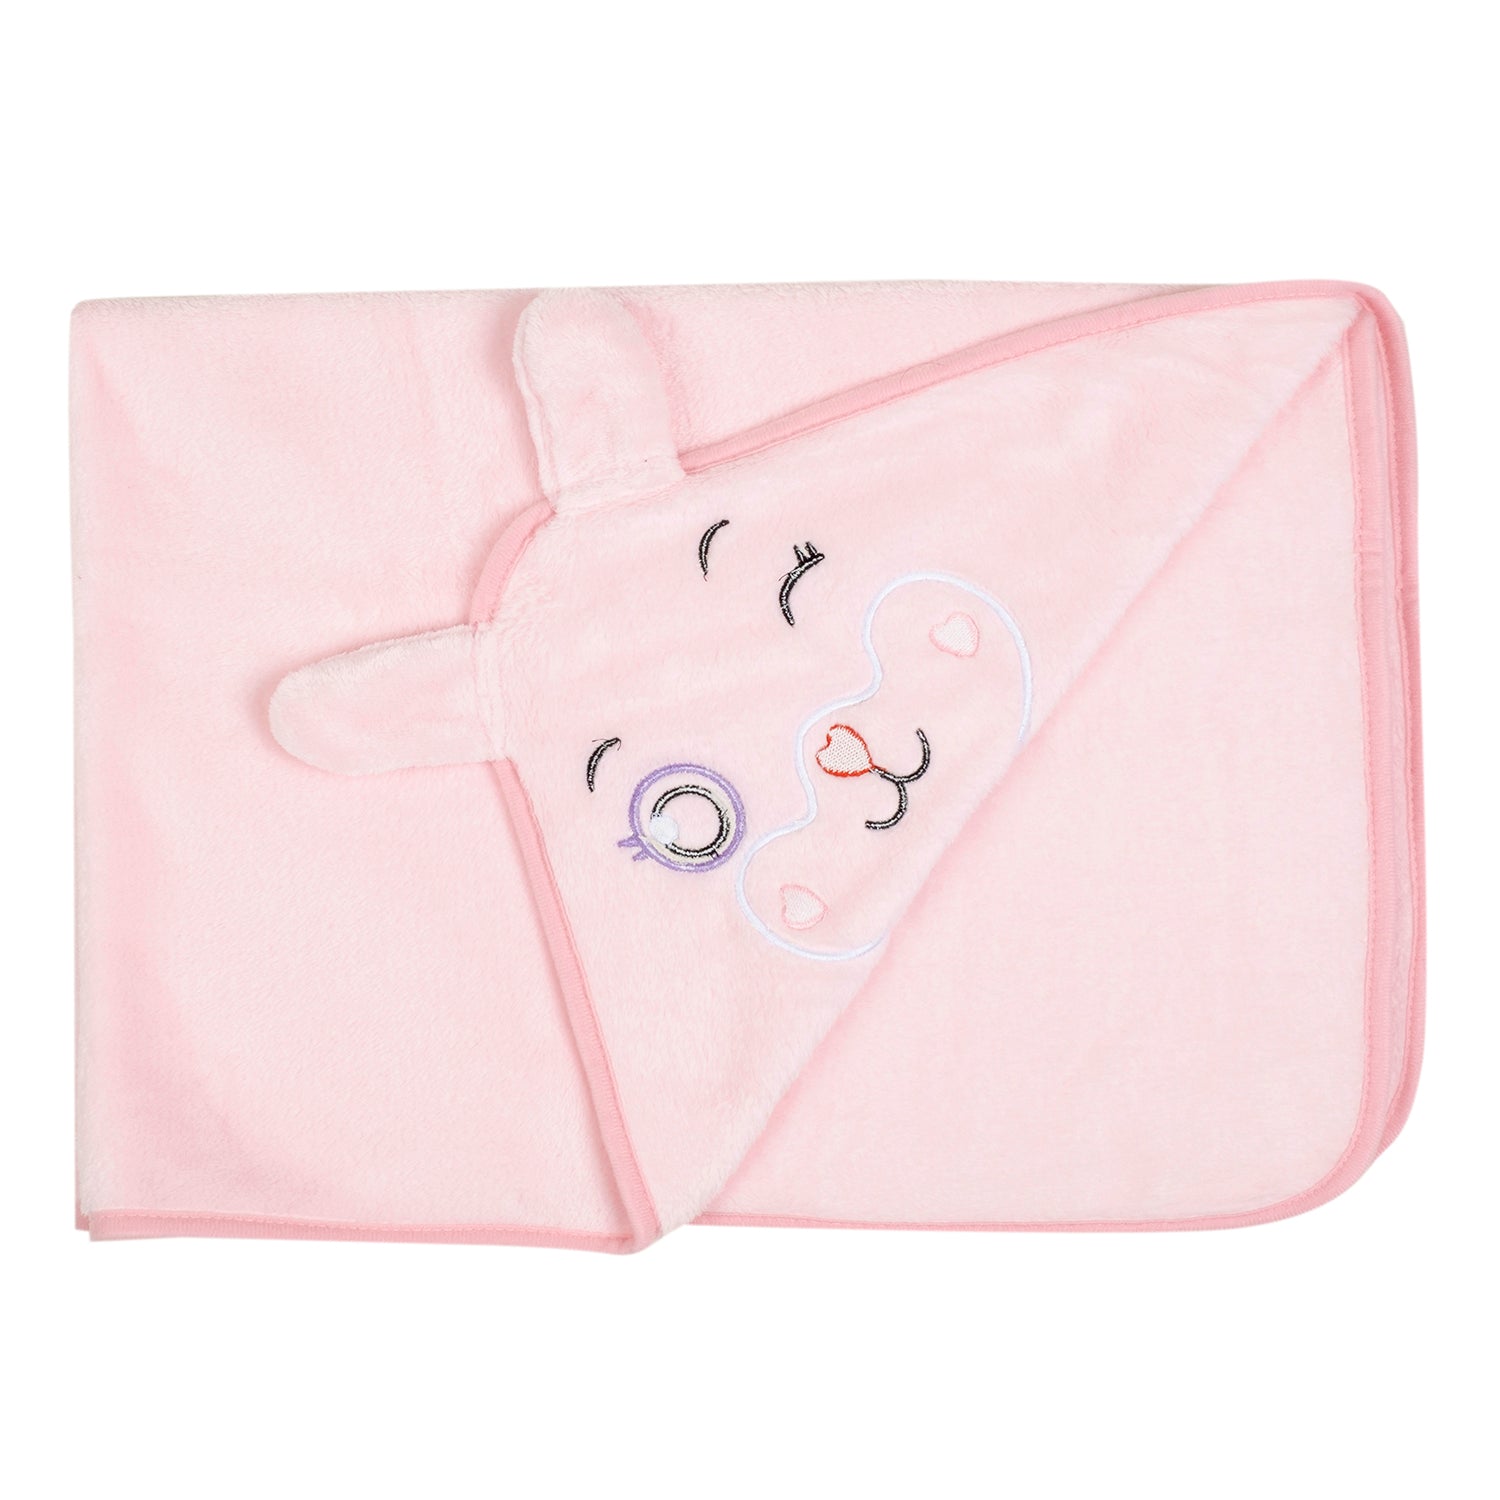 Baby Moo Rabbit Applique with 3D Ears Soft Blanket - Pink